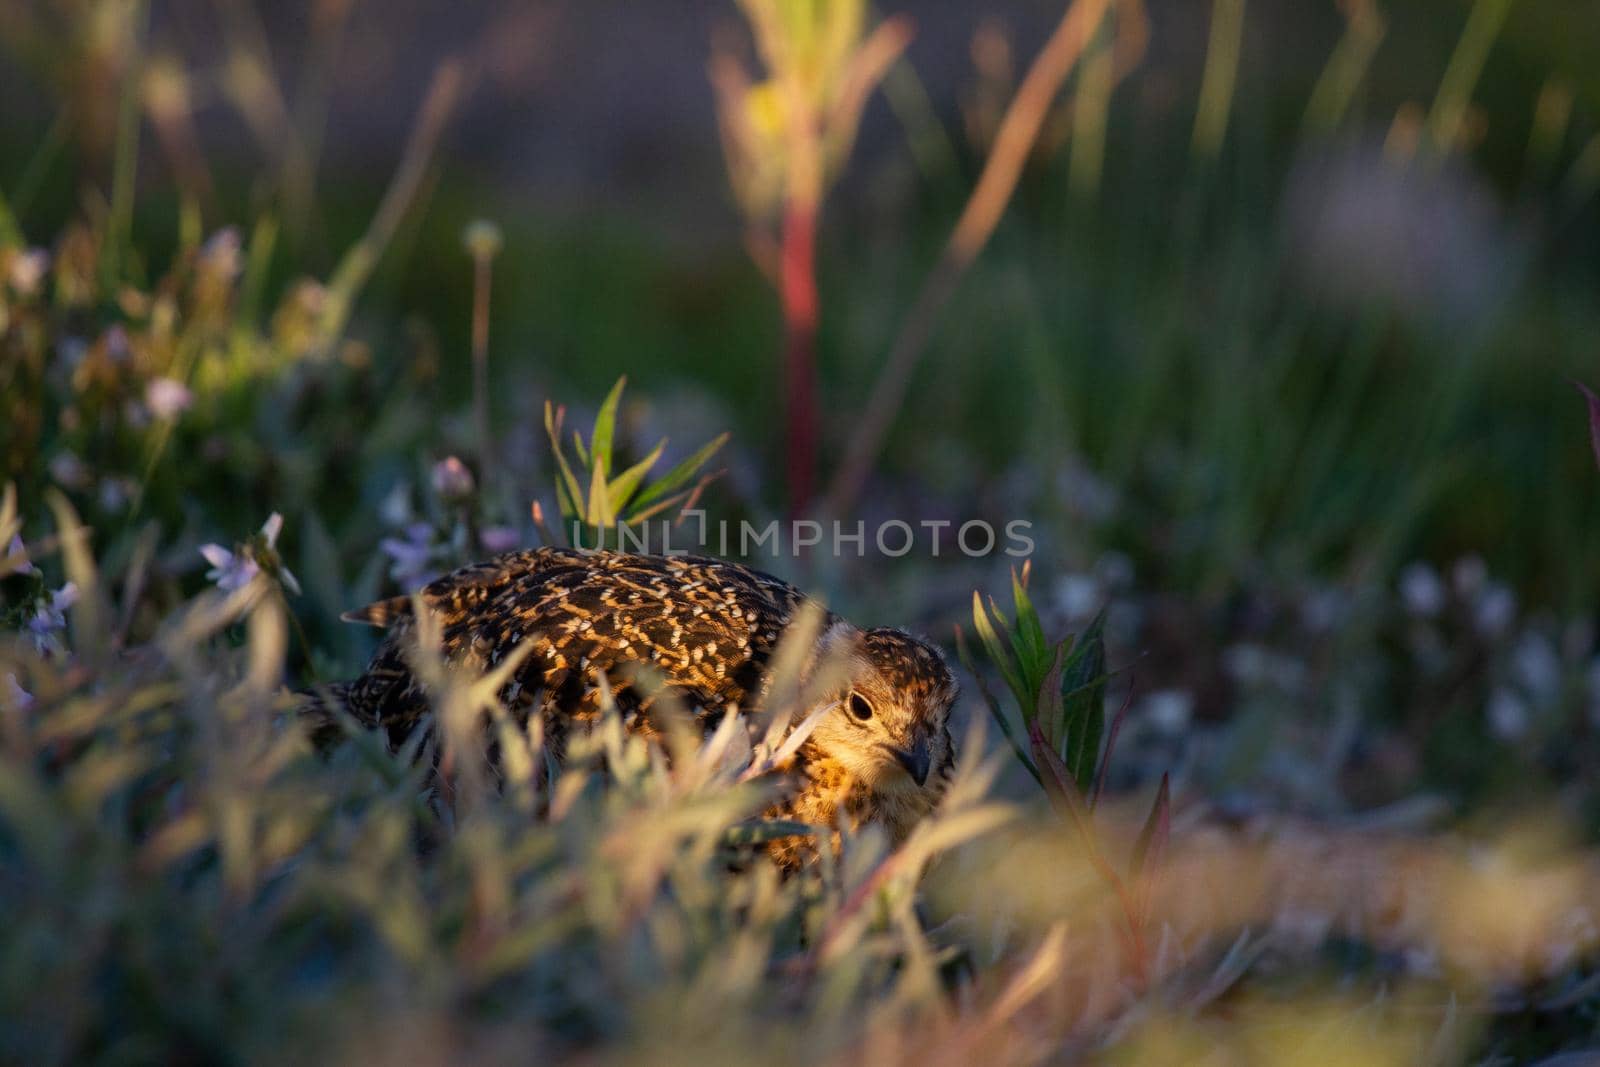 A young willow ptarmigan or grouse hiding among willows in Canada's arctic tundra. Near Arviat, Nunavut